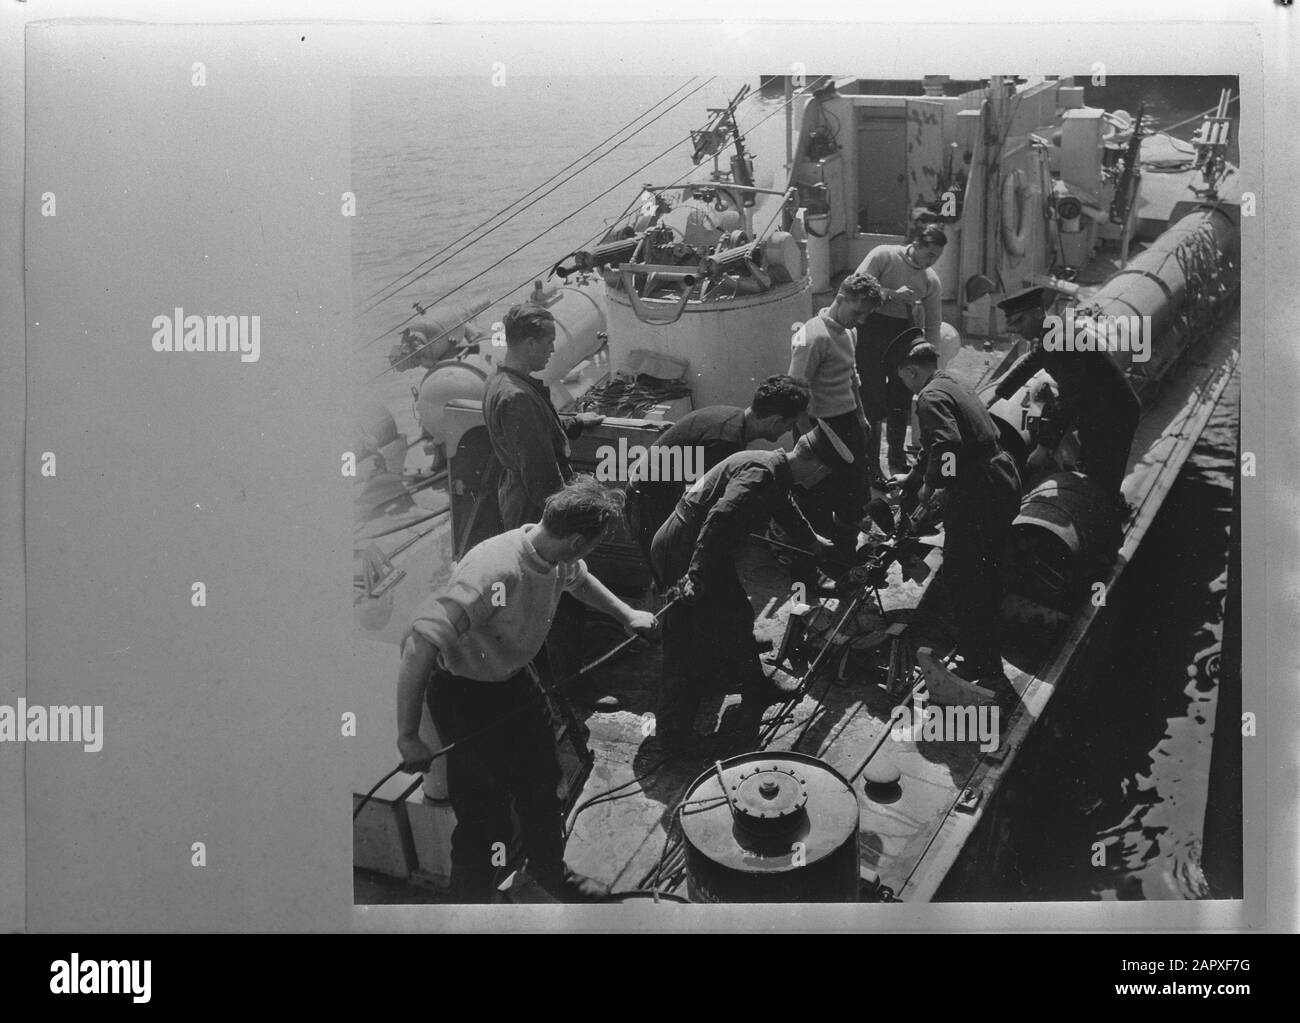 Navy [Navy] Anefo serie London Series: Barche a motore olandese in Gran Bretagna. Work with siluro tubes Annotation: Repronegative Date: July 1944 Location: Great Britain Keywords: Crew, navy, warships, World War II Foto Stock